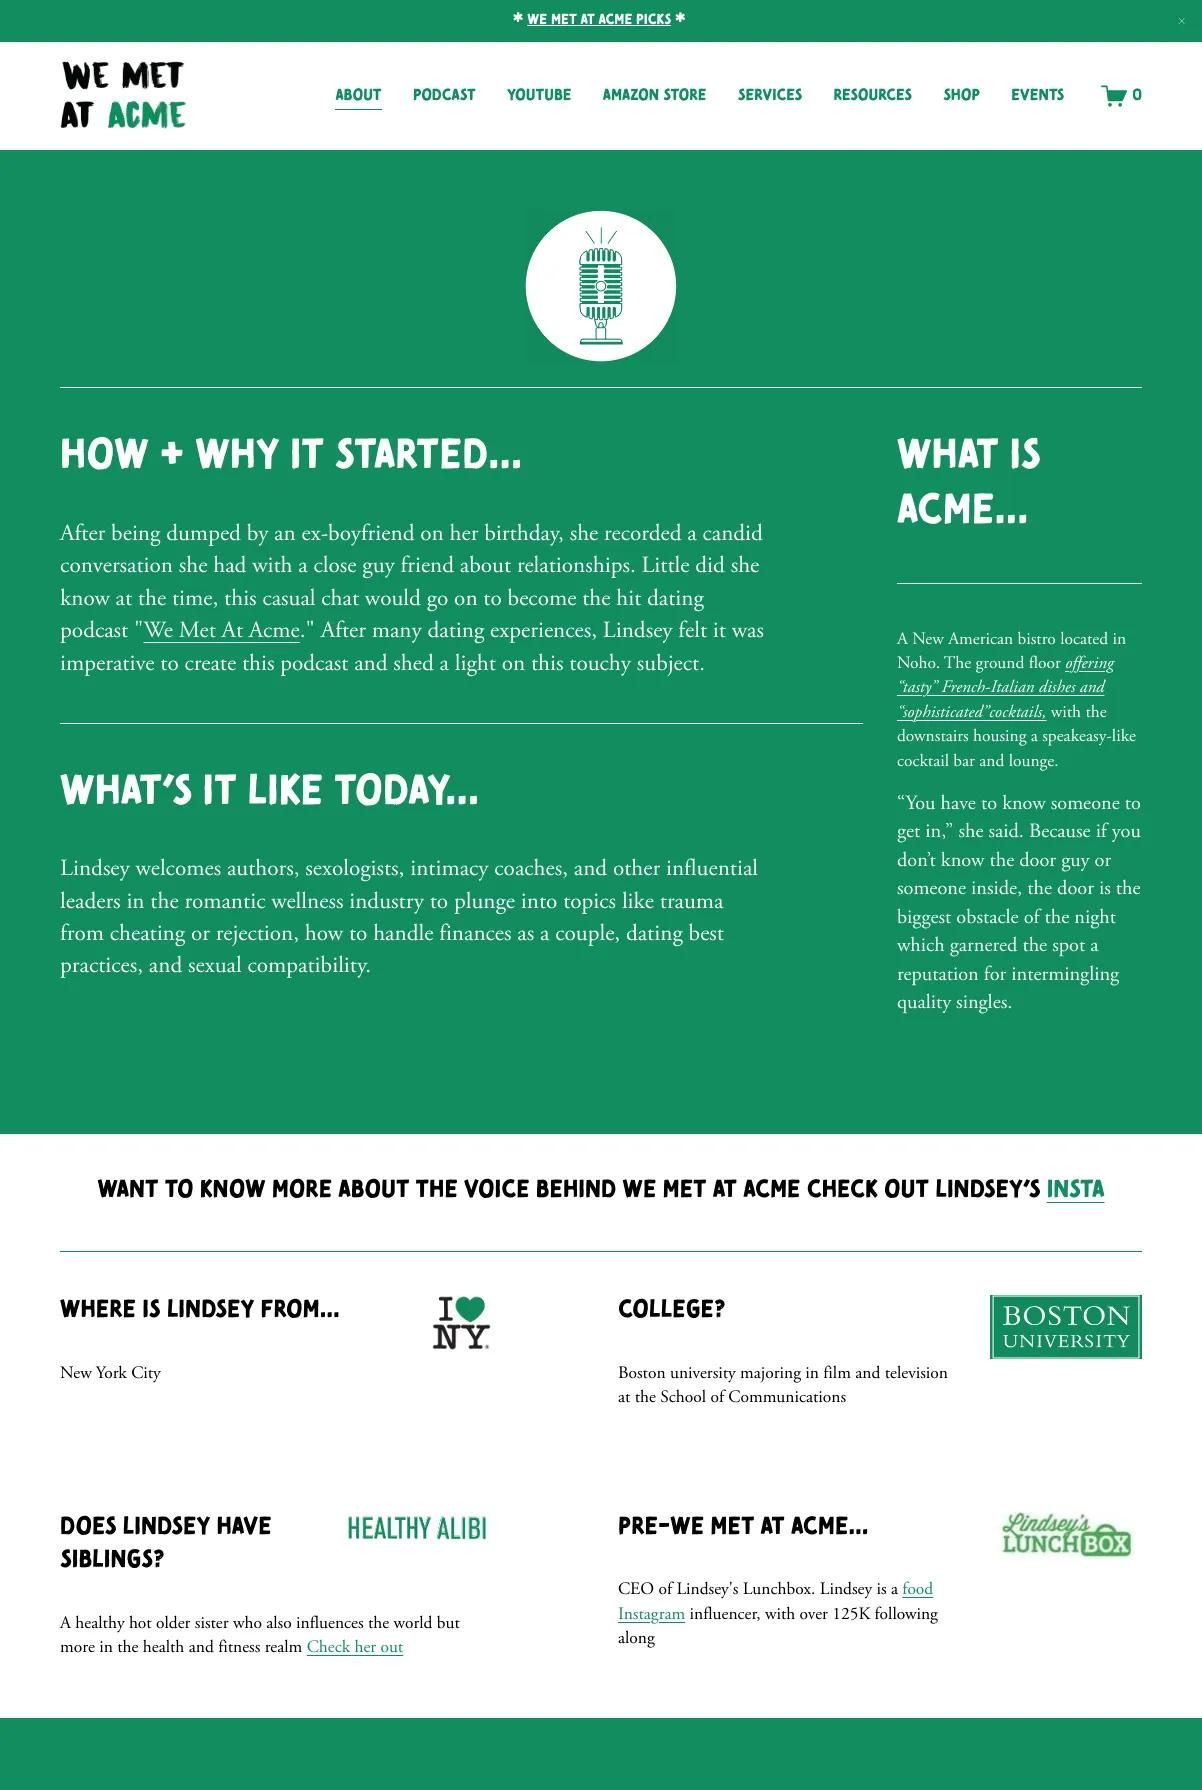 Screenshot 2 of We Met At Acme (Example Squarespace Podcast Website)